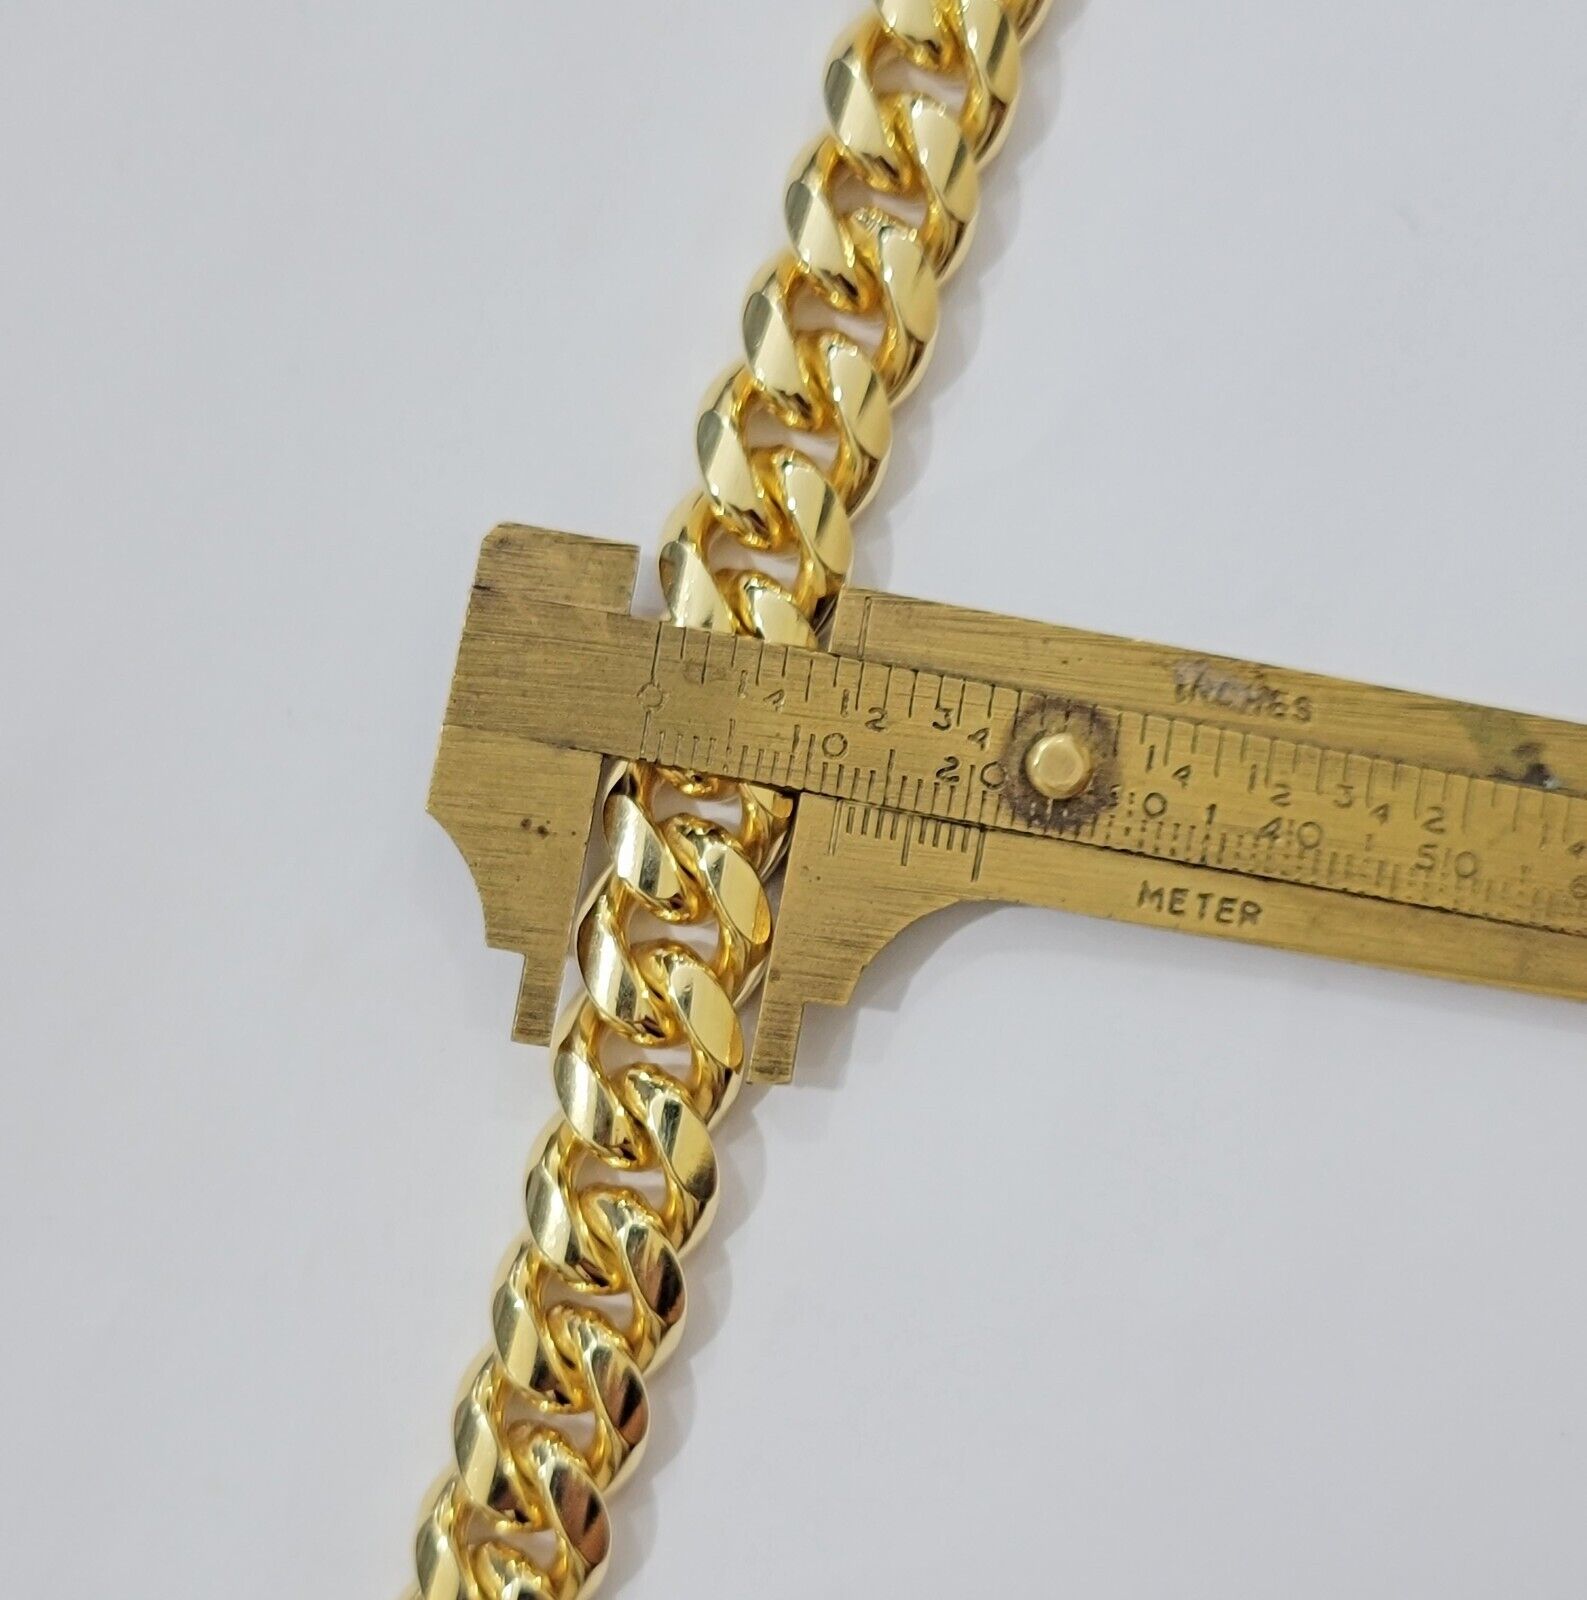 Solid 10k Gold Bracelet Miami Cuban Link 12mm 8" Inch Box Clasp SOLID LINK, Mens